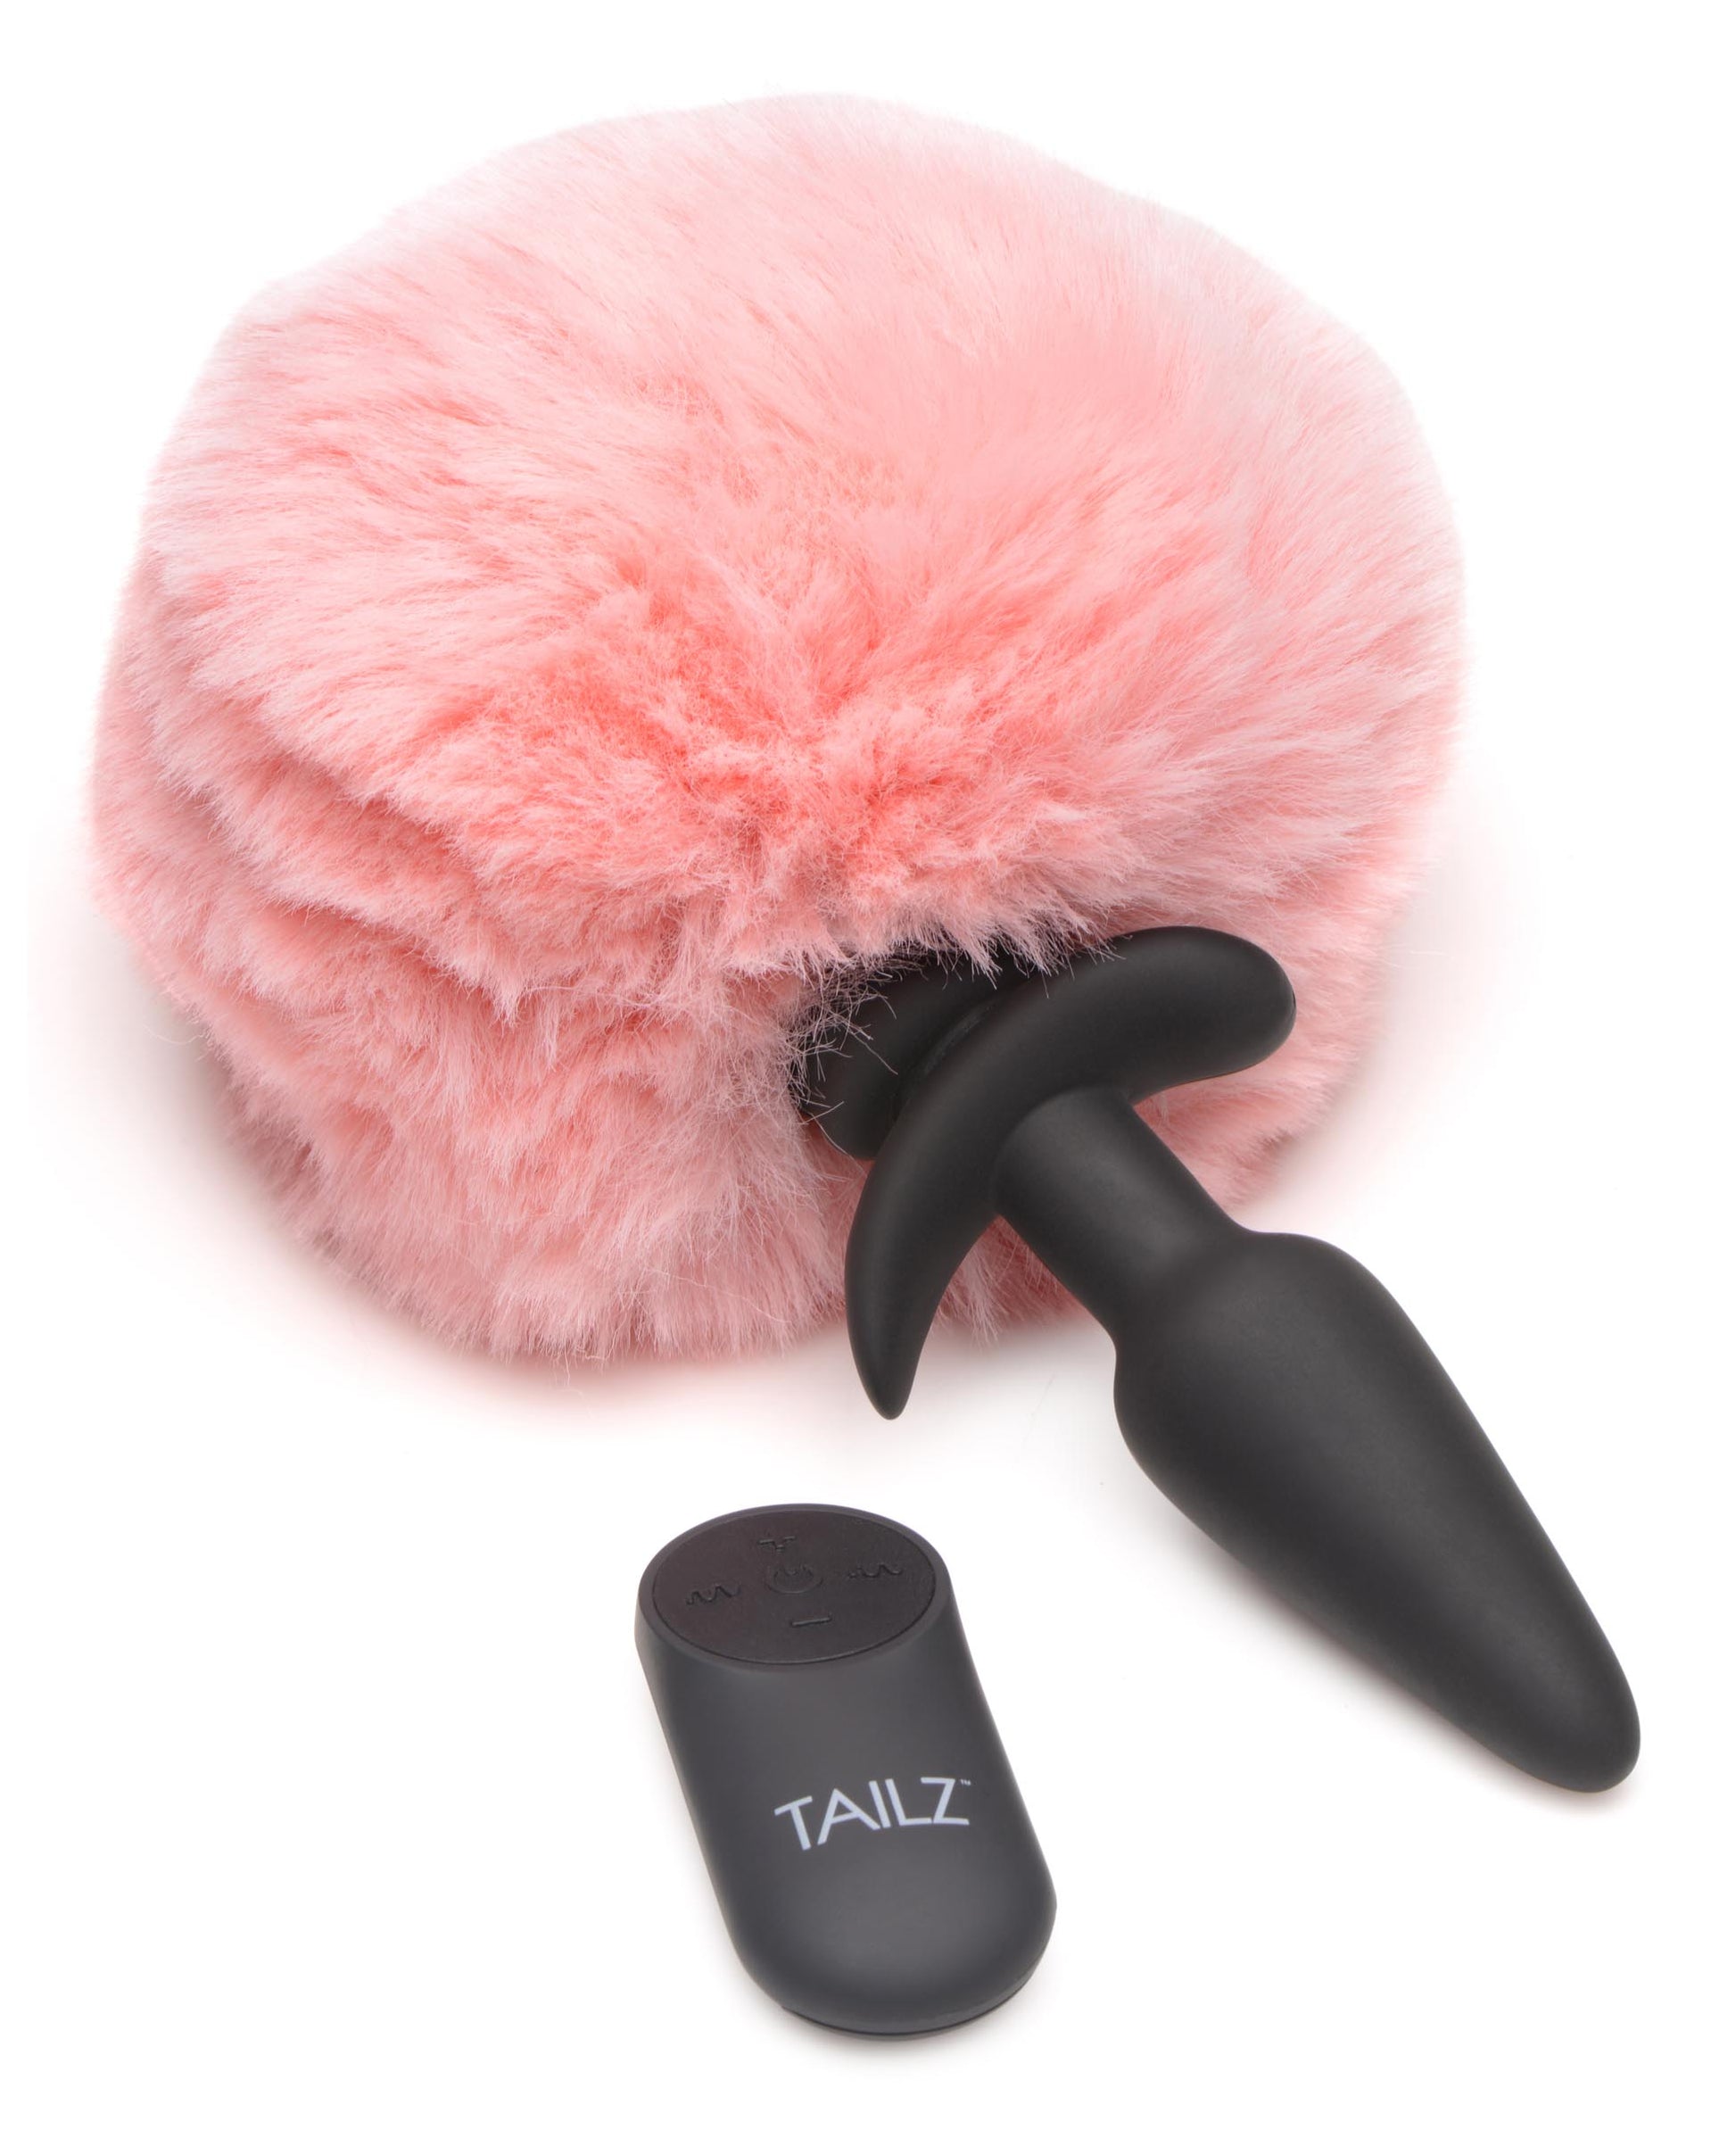 Small Vibrating Anal Plug with Interchangeable Bunny Tail - Pink - UABDSM